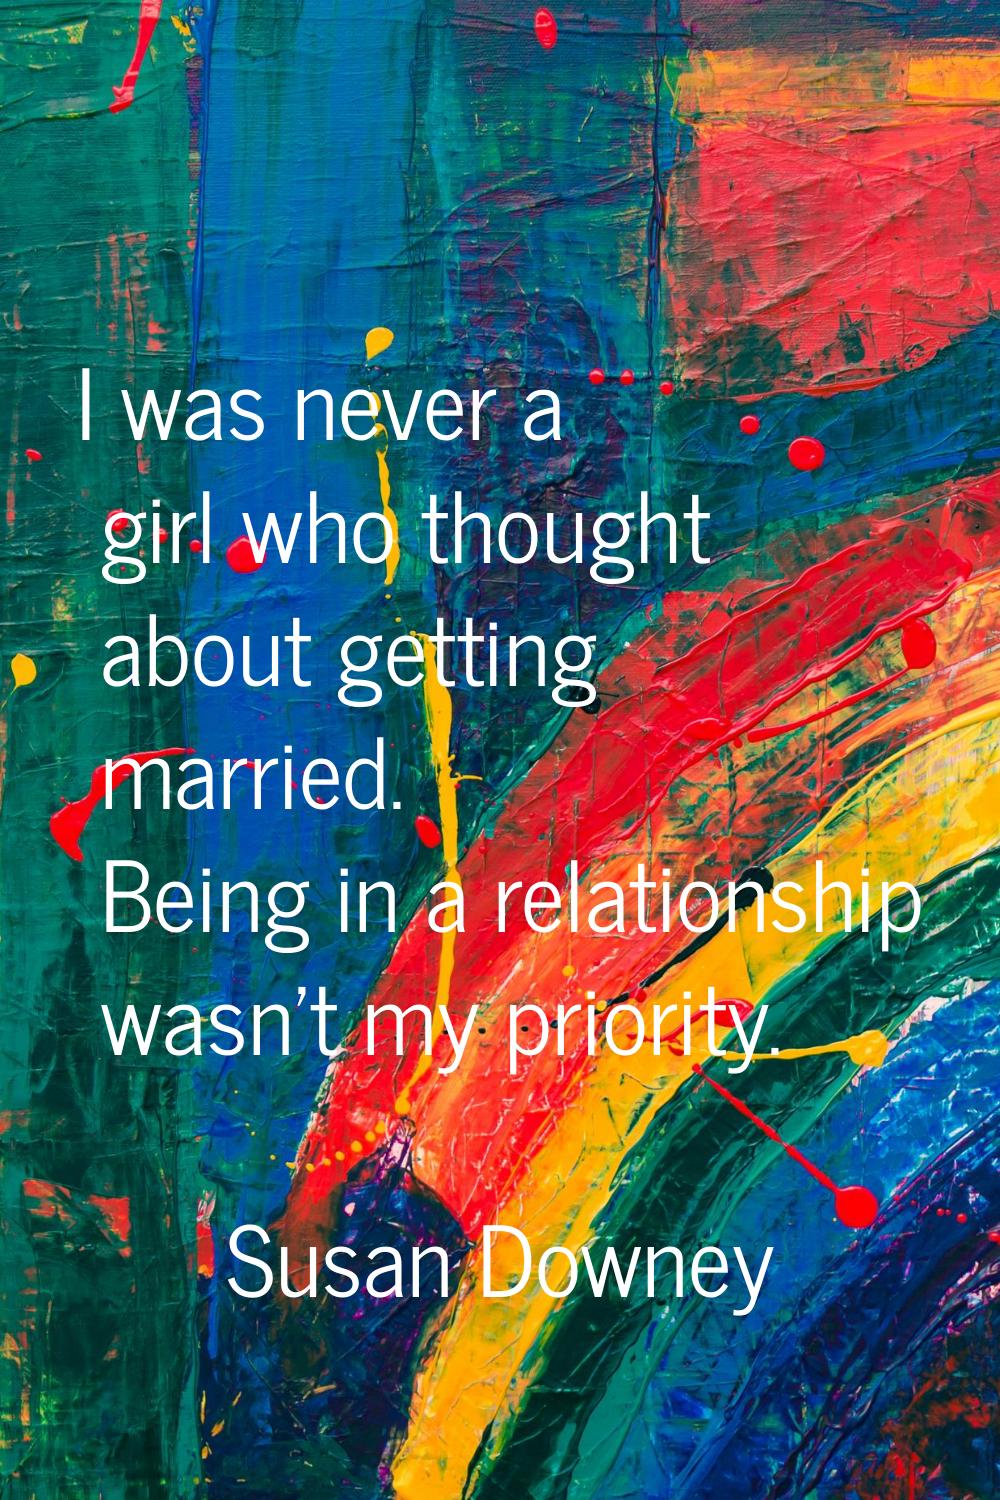 I was never a girl who thought about getting married. Being in a relationship wasn't my priority.